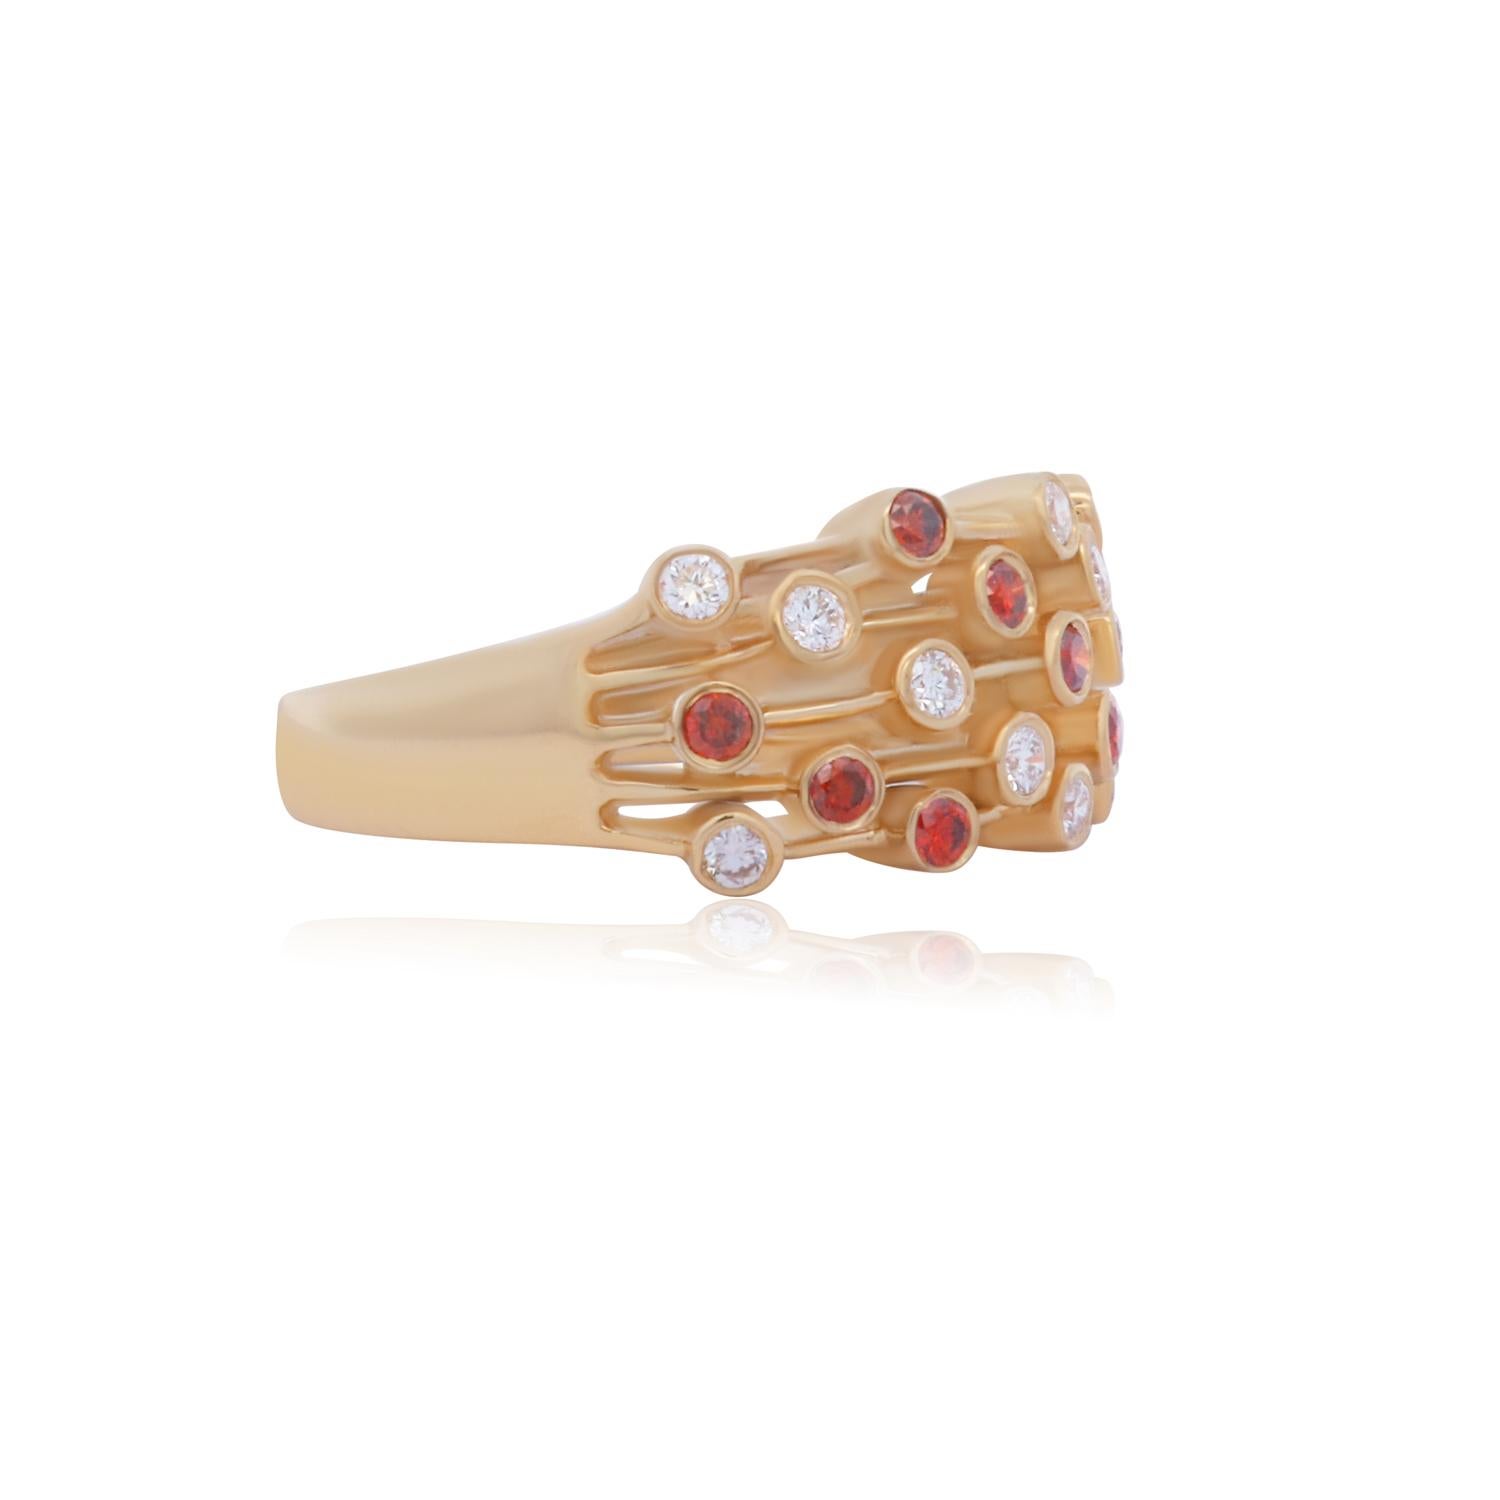 Material: 14k Yellow Gold
Gemstones: 11 Round Red Diamond at 0.35 Carats Total Weight
Diamonds: 12 Round Brilliant Diamonds at 0.28 Carats

SI Clarity / H-I Color. 
Ring Size: 6.5. Alberto offers complimentary sizing on all rings.

Fine one-of-a